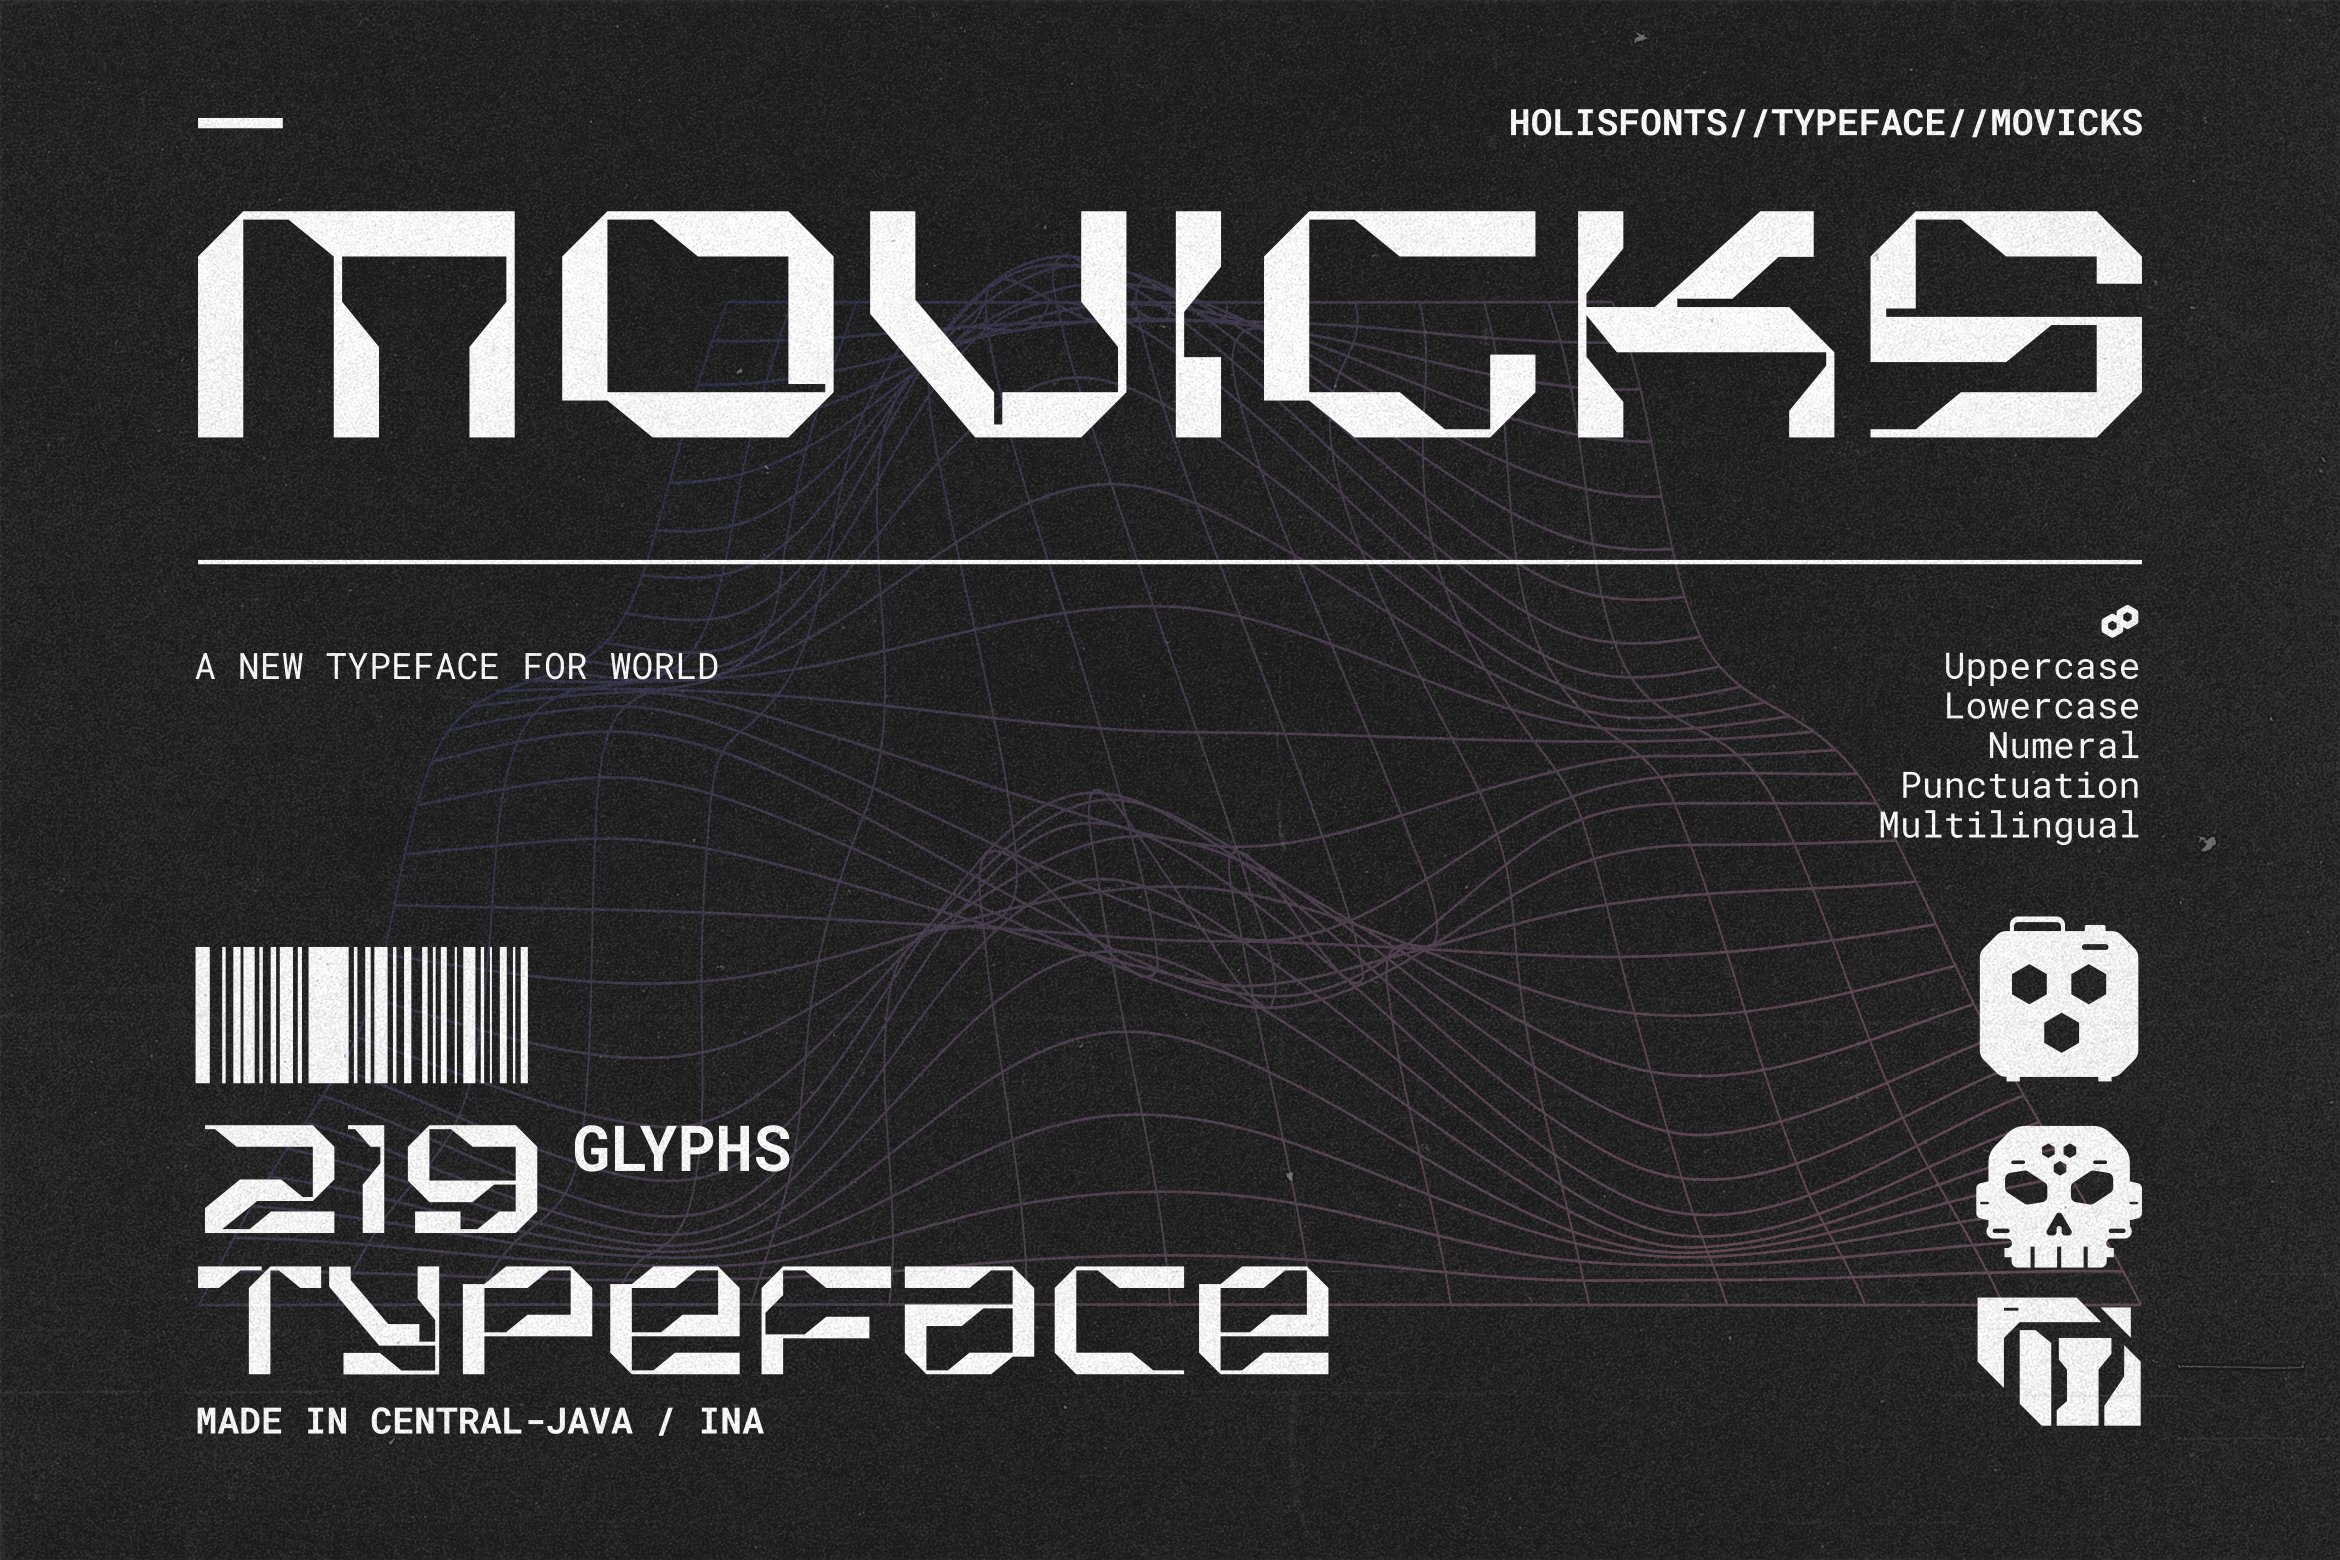 Movicks Typeface cover image.